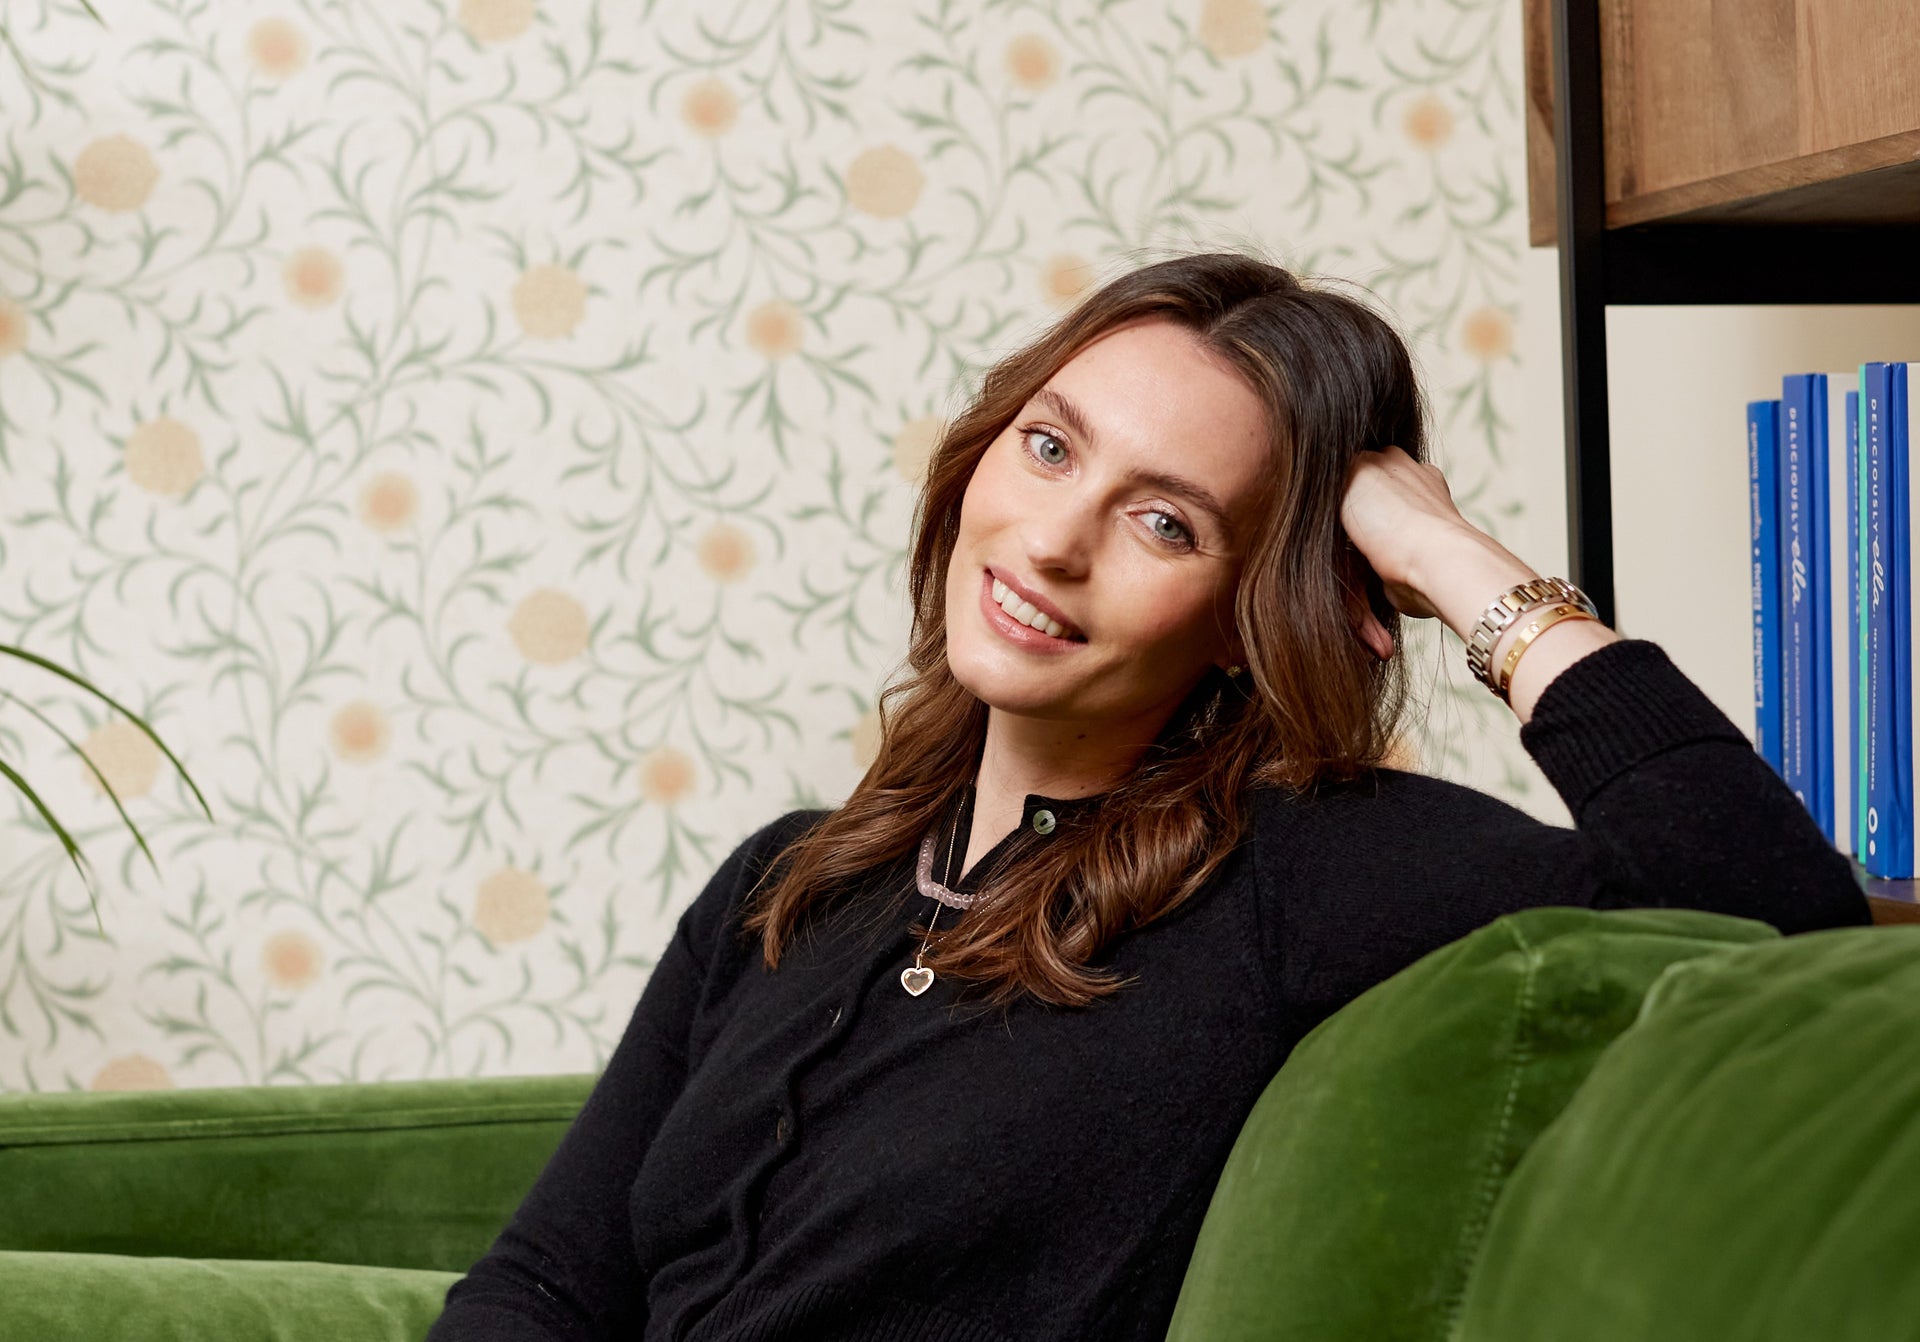 Deliciously Ella Talks Realistic Wellbeing And Shares Her Daily Routine